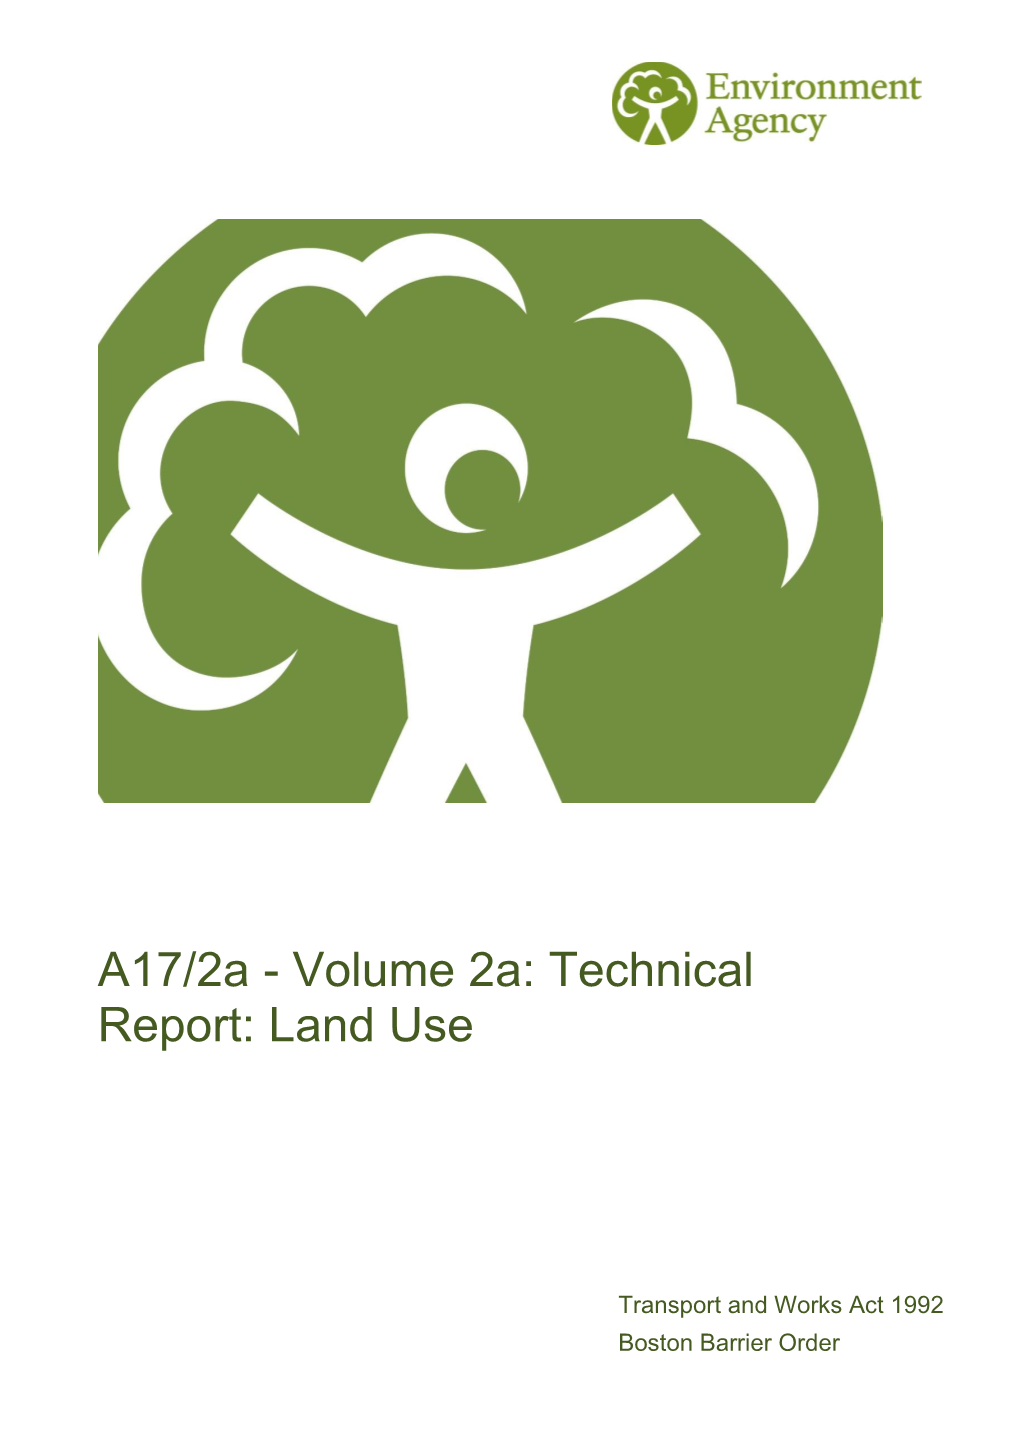 A17/2A - Volume 2A: Technical Report: Land Use